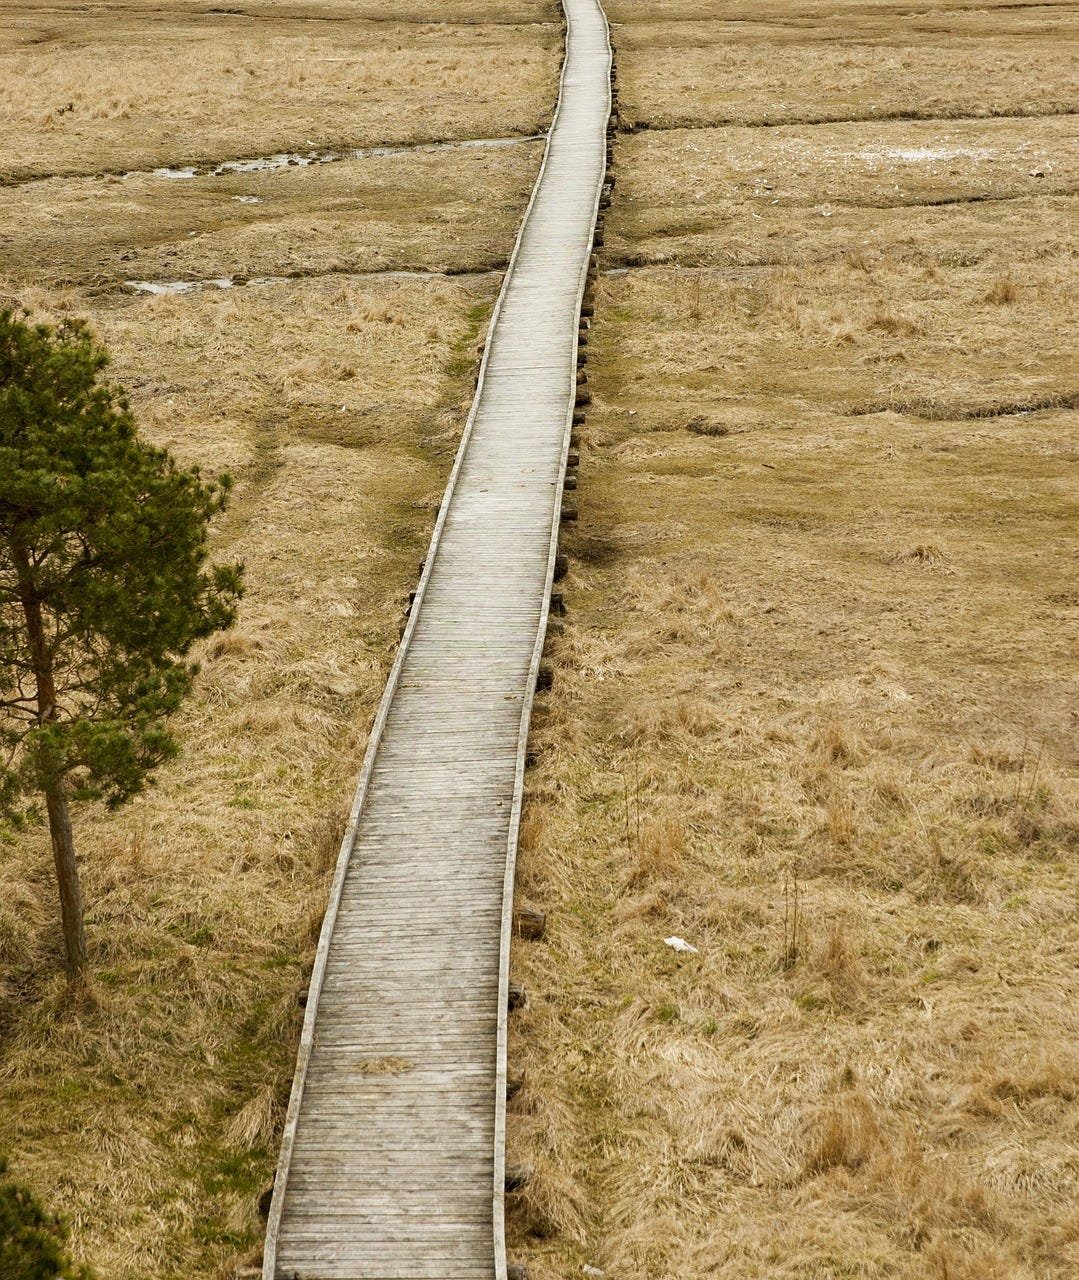 wooden walkway crossing brown grasslands, both disappearing at the horizon.